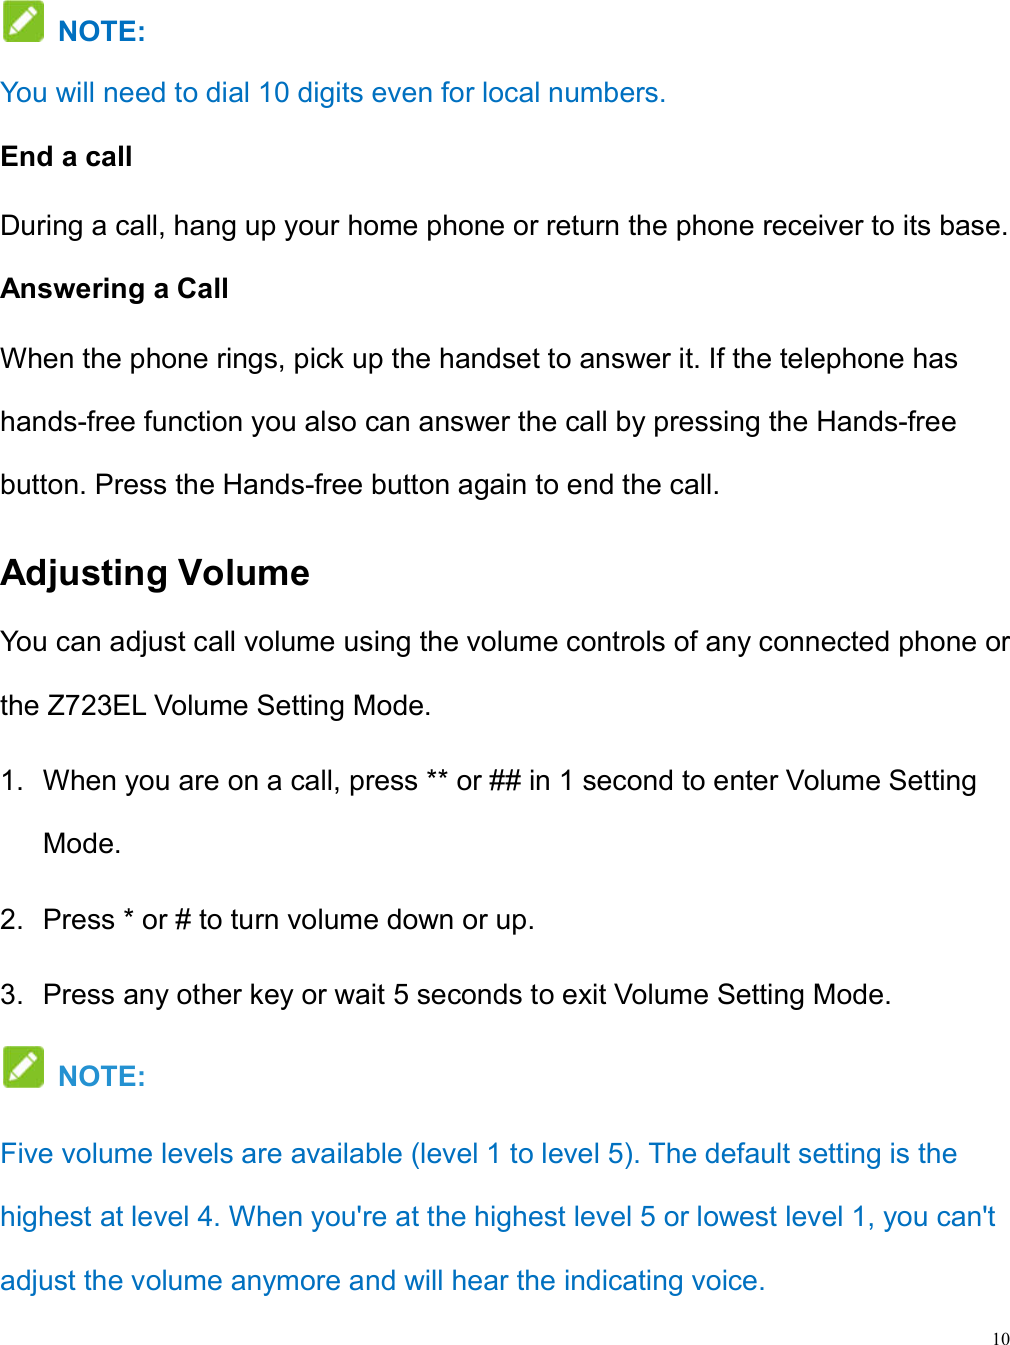 10   NOTE:   You will need to dial 10 digits even for local numbers. End a call During a call, hang up your home phone or return the phone receiver to its base. Answering a Call When the phone rings, pick up the handset to answer it. If the telephone has hands-free function you also can answer the call by pressing the Hands-free button. Press the Hands-free button again to end the call. Adjusting Volume You can adjust call volume using the volume controls of any connected phone or the Z723EL Volume Setting Mode. 1.  When you are on a call, press ** or ## in 1 second to enter Volume Setting Mode.   2.  Press * or # to turn volume down or up. 3.  Press any other key or wait 5 seconds to exit Volume Setting Mode.   NOTE:   Five volume levels are available (level 1 to level 5). The default setting is the highest at level 4. When you&apos;re at the highest level 5 or lowest level 1, you can&apos;t adjust the volume anymore and will hear the indicating voice. 